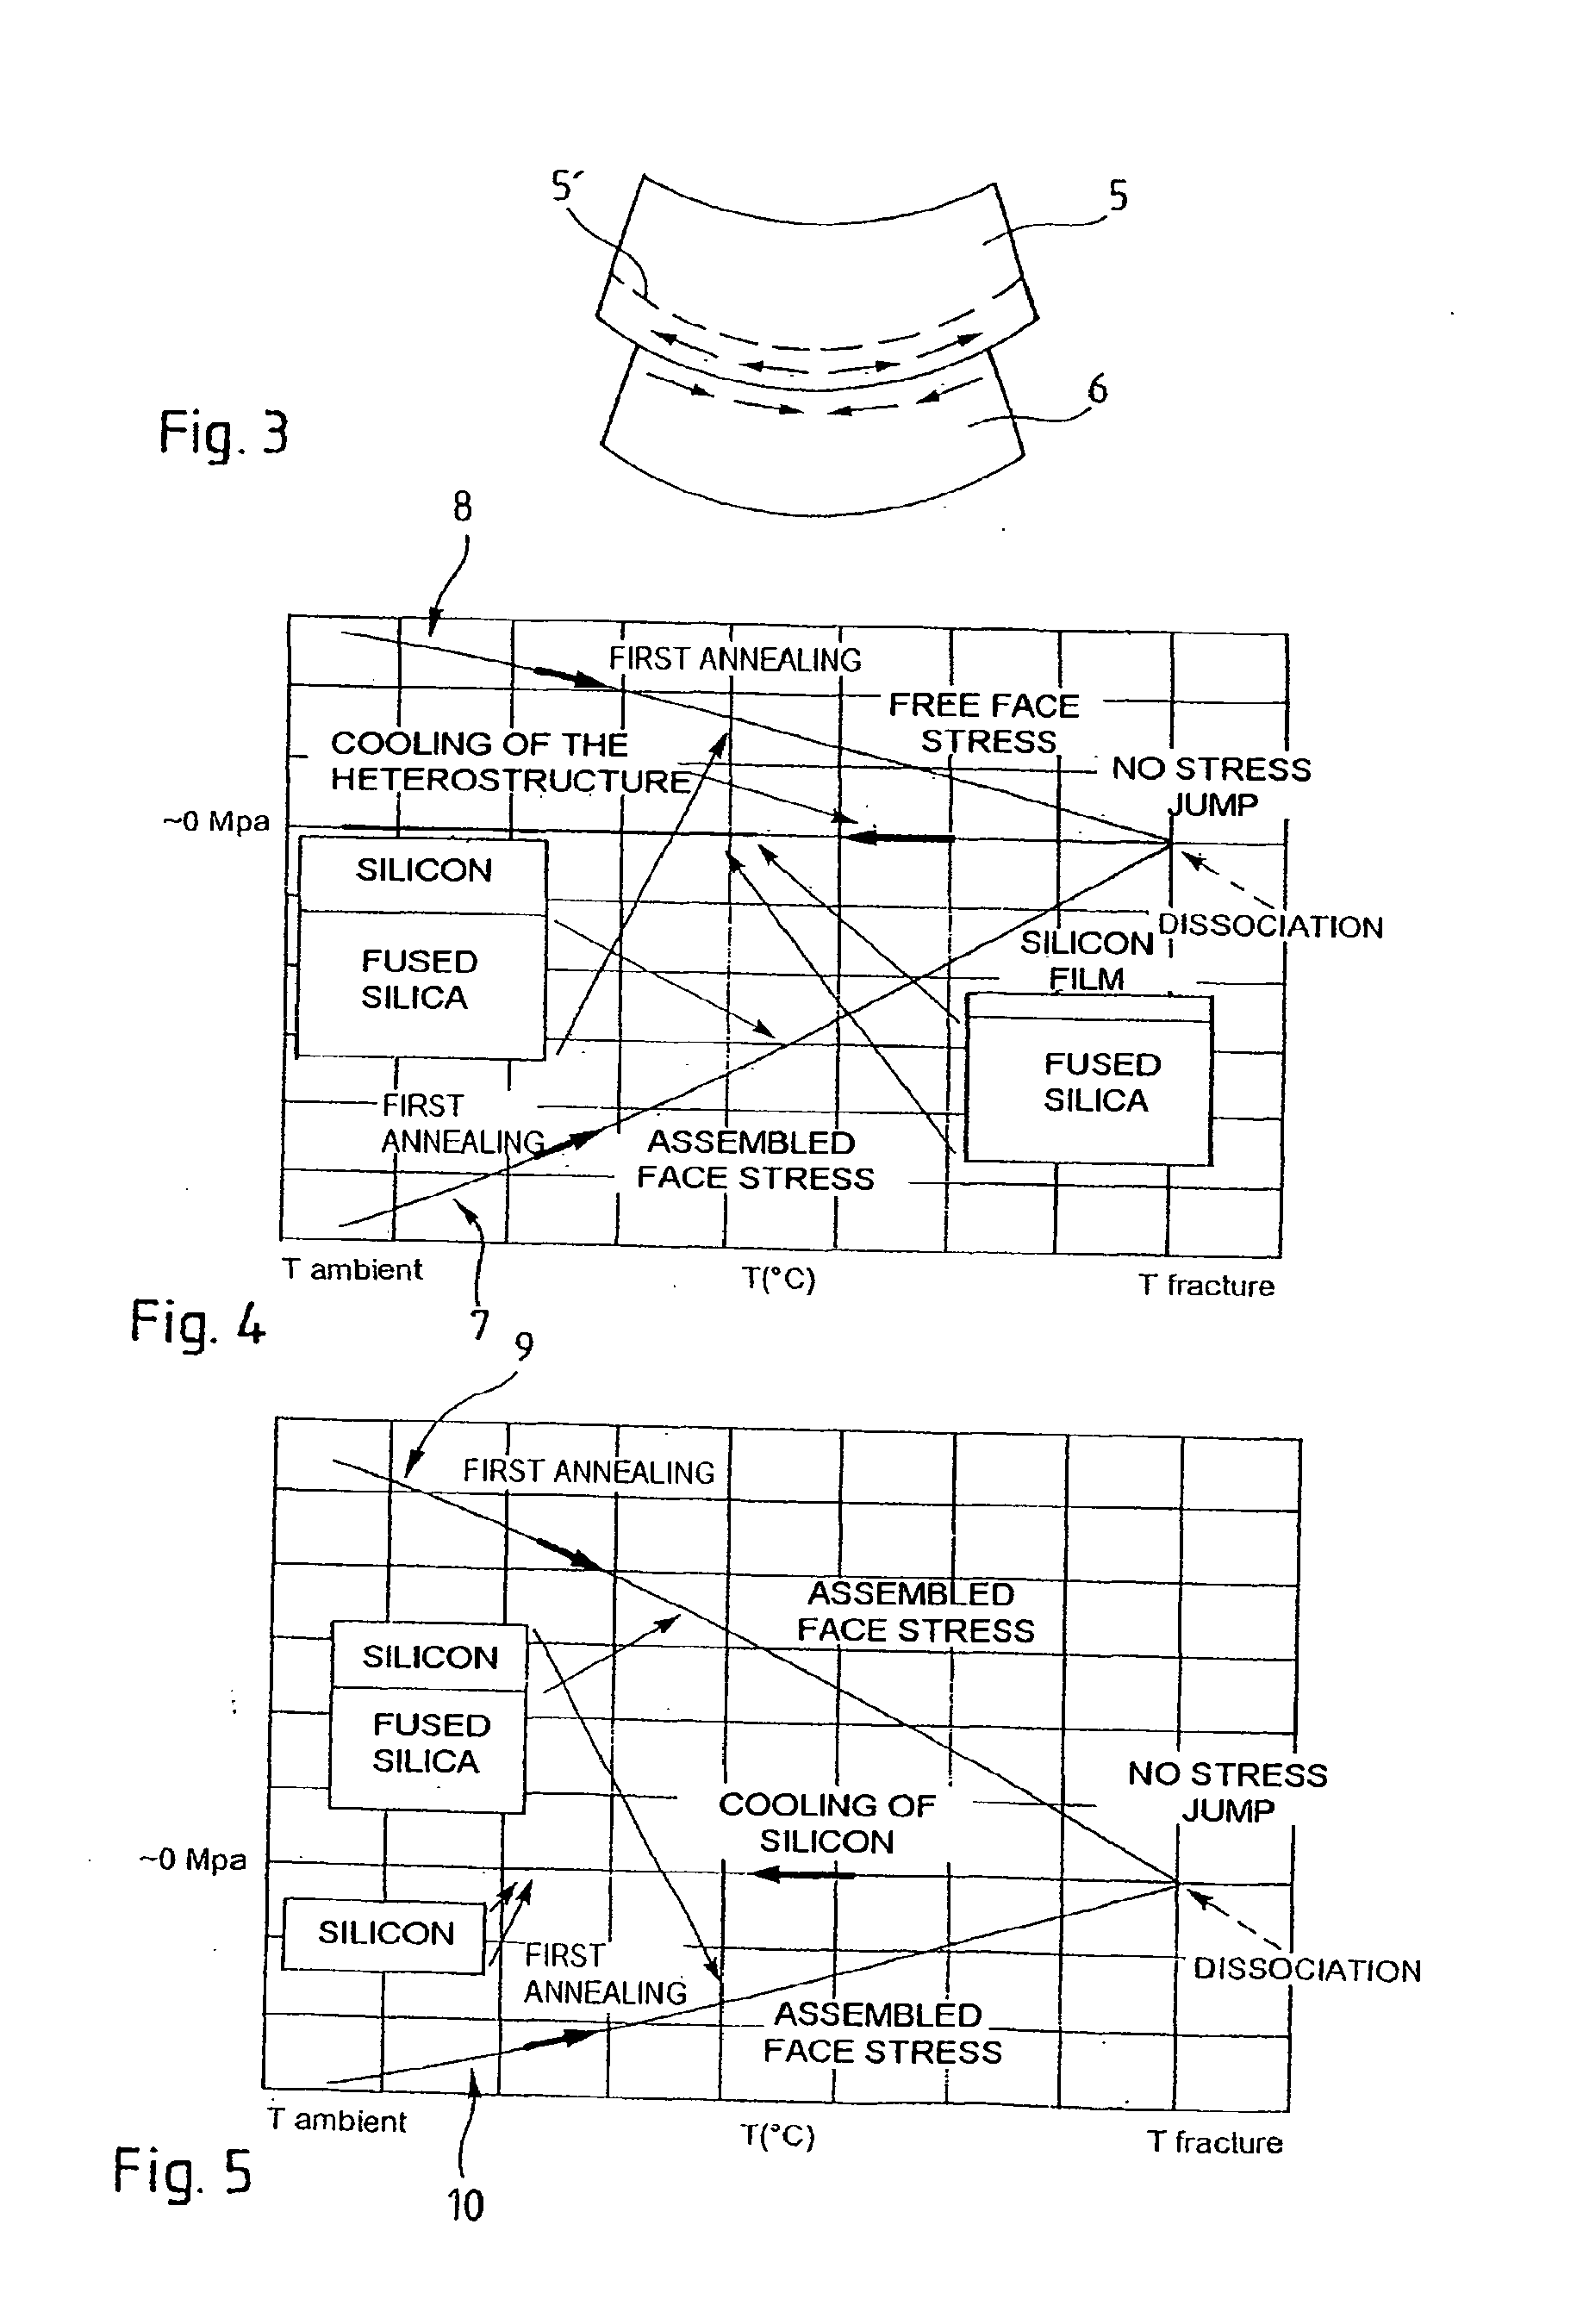 Method for making a stressed structure designed to be dissociated